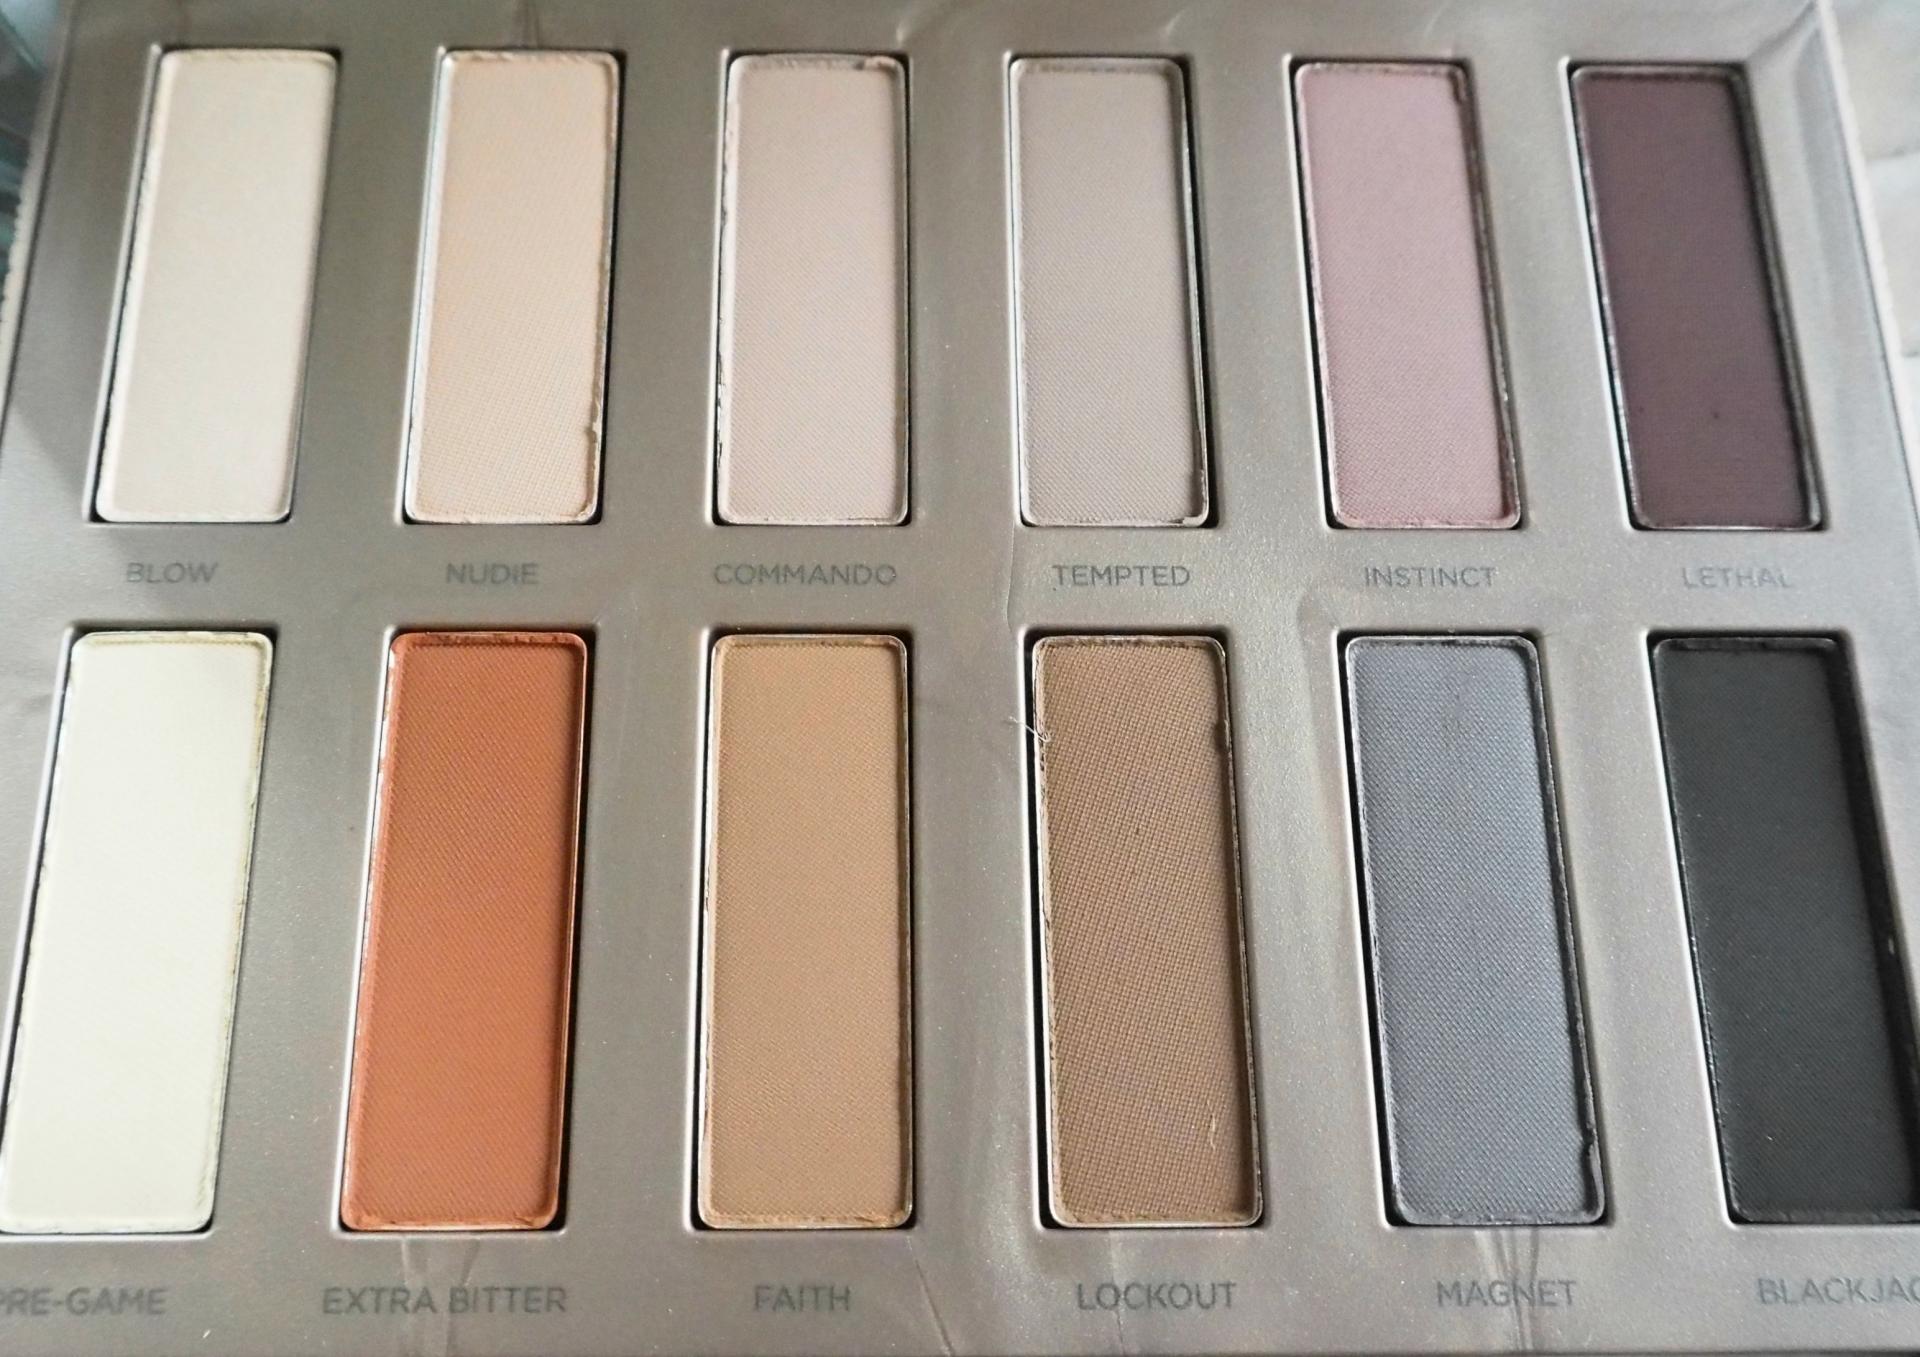 Urban Decay Naked Ultimate Basics Palette Review + Swatches